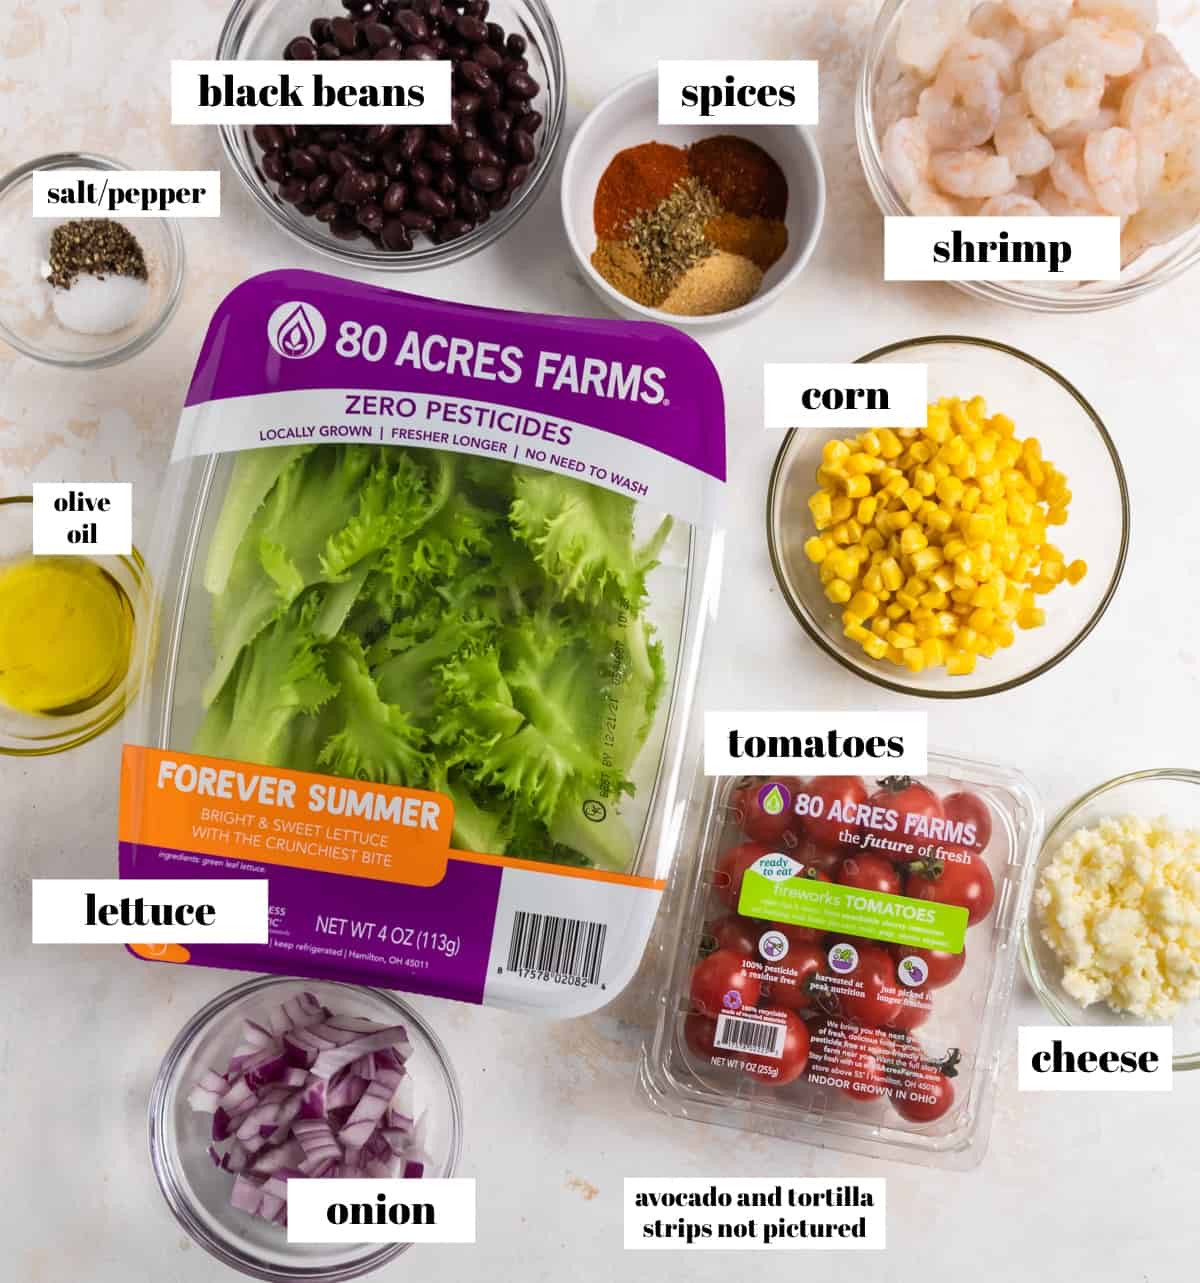 Lettuce, tomatoes, beans, shrimp, cheese and other ingredients for recipe labeled on counter.